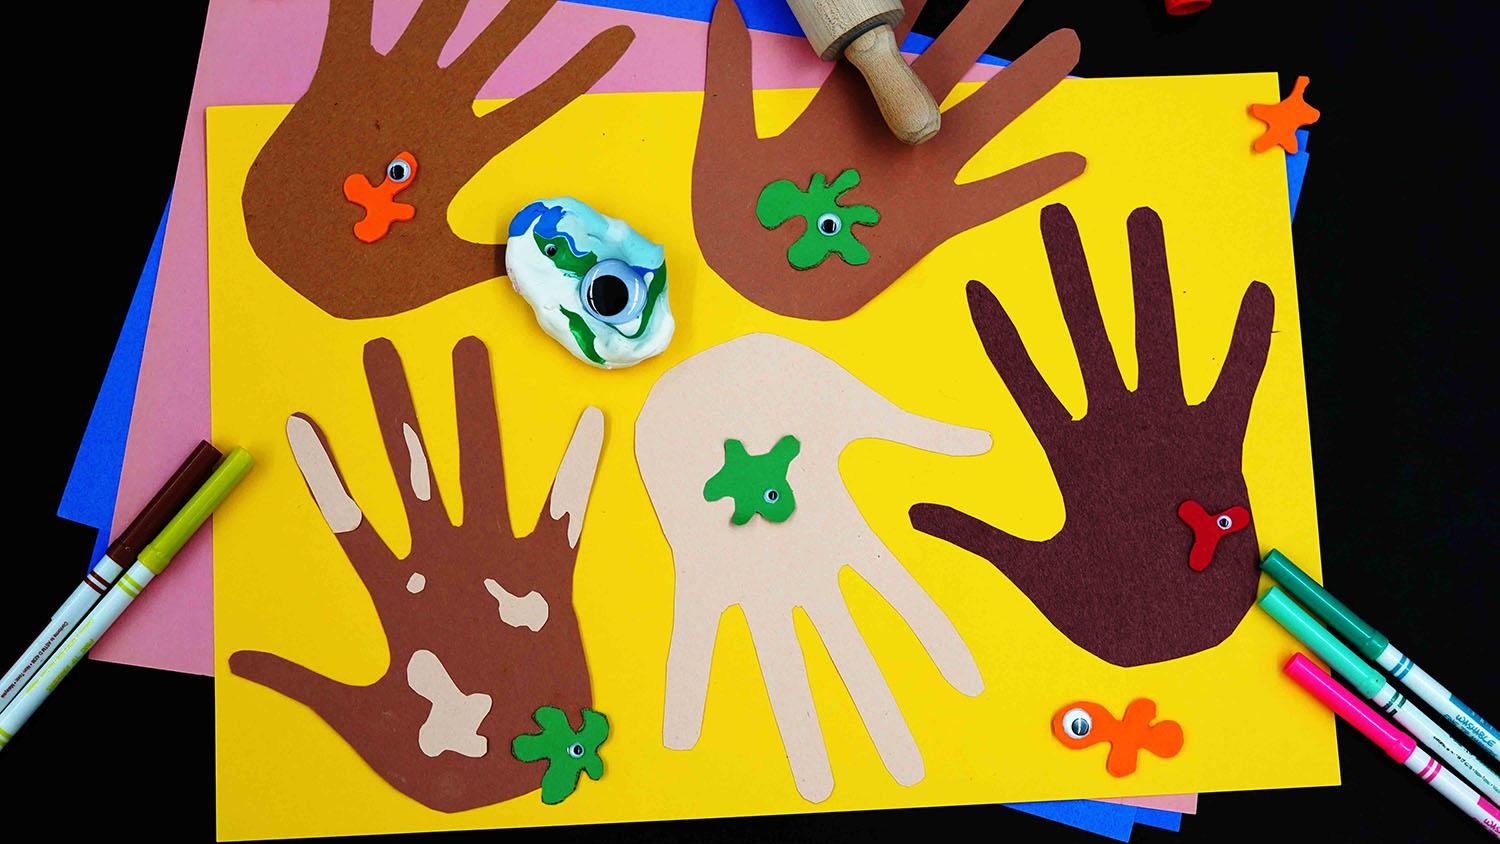 Hand shapes cut out of construction paper on more pieces of construction paper, along with crafting tools